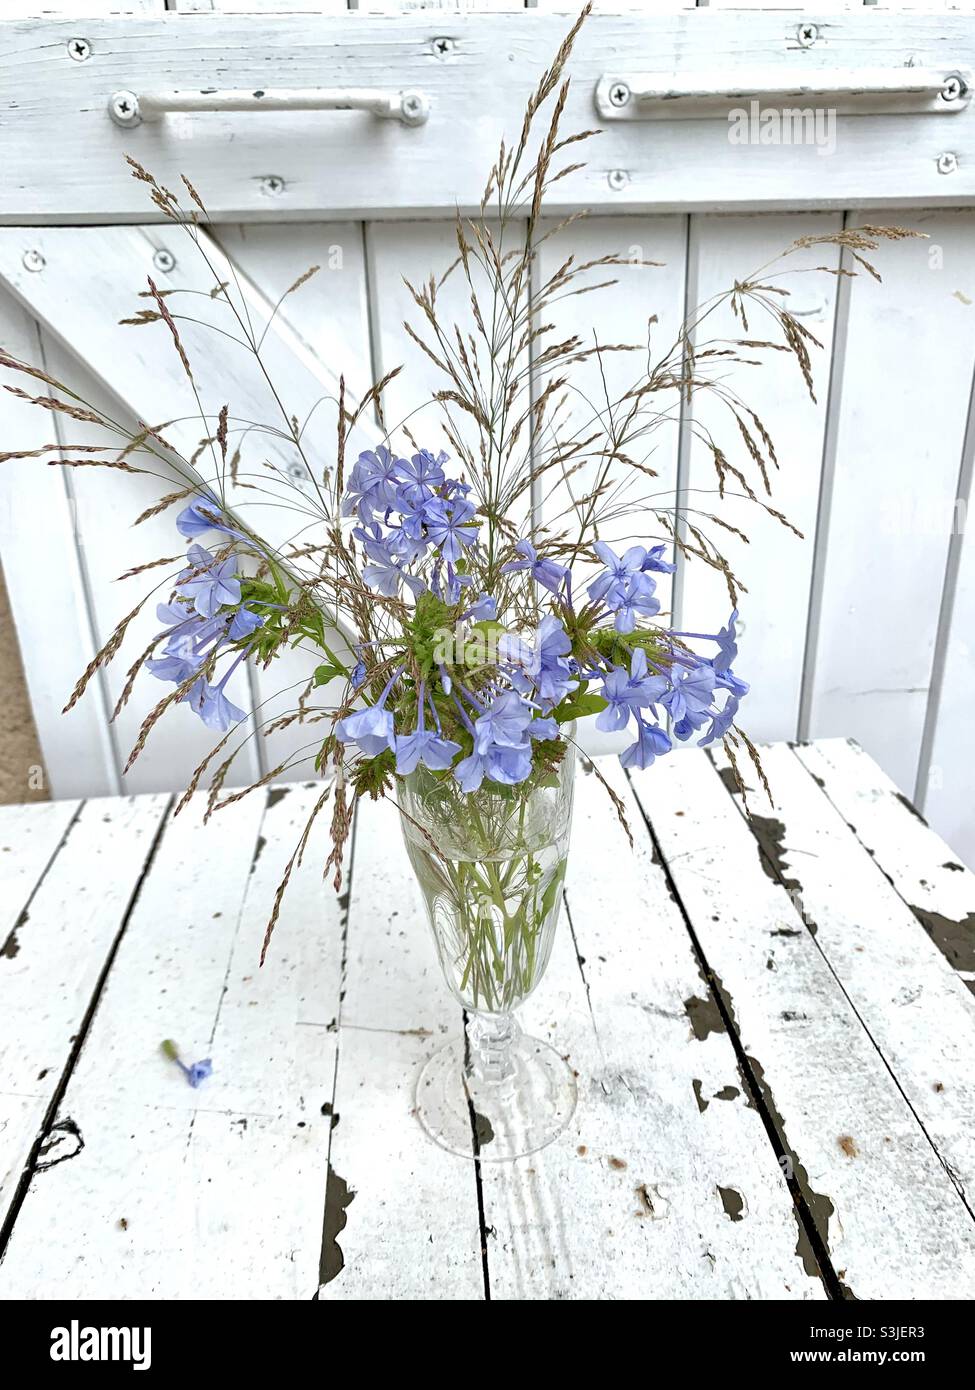 Plumbago with grasses in a glass vase. White background. Corsica, France. Plumbago auriculaire. Stock Photo